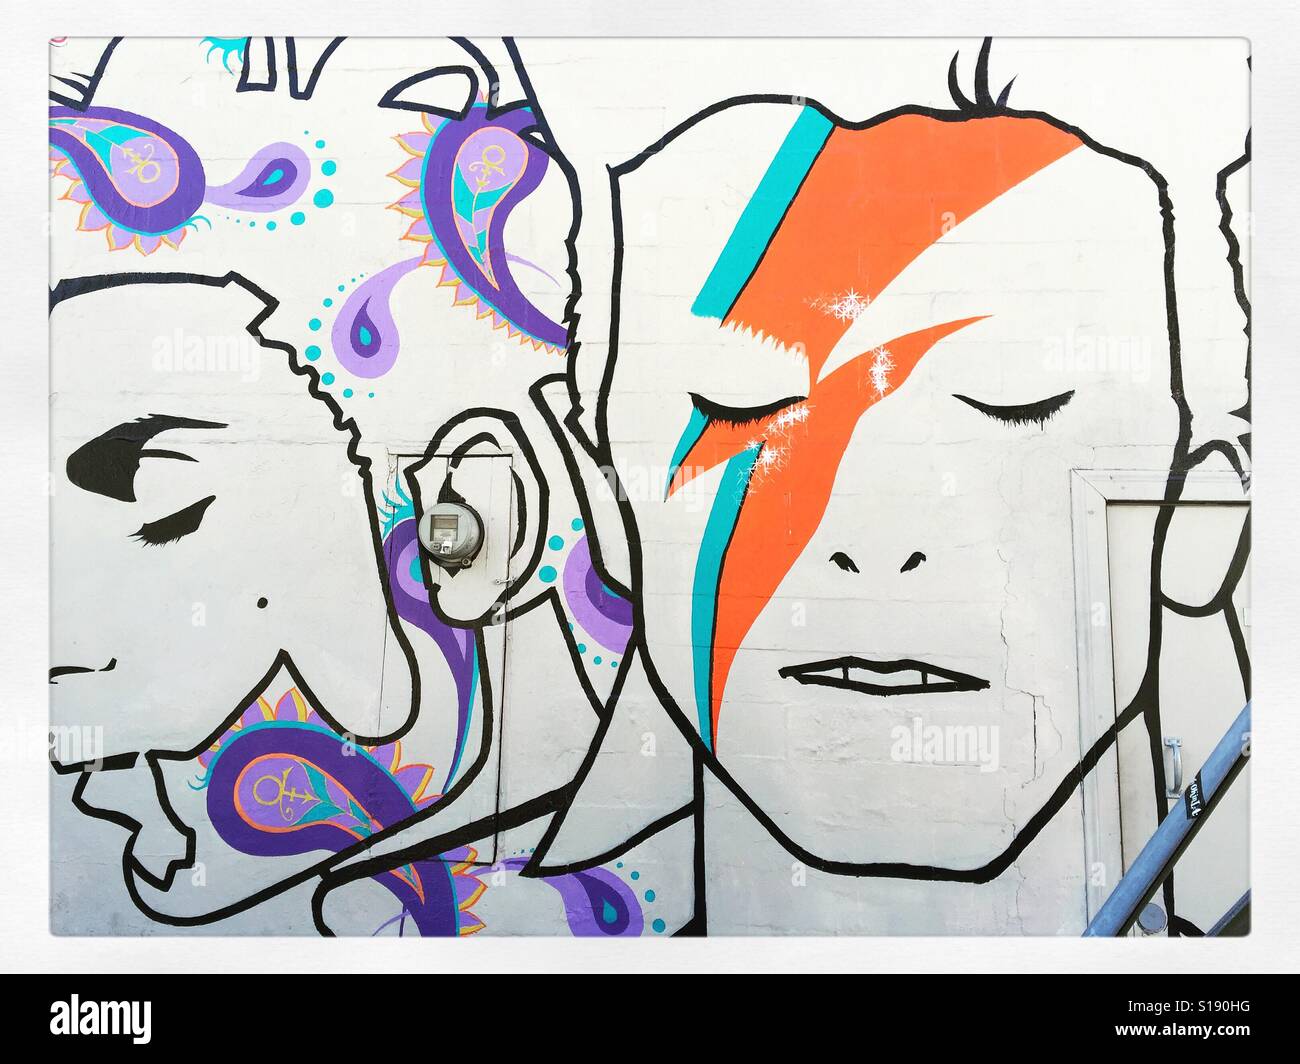 Bowie / Prince mural Stock Photo